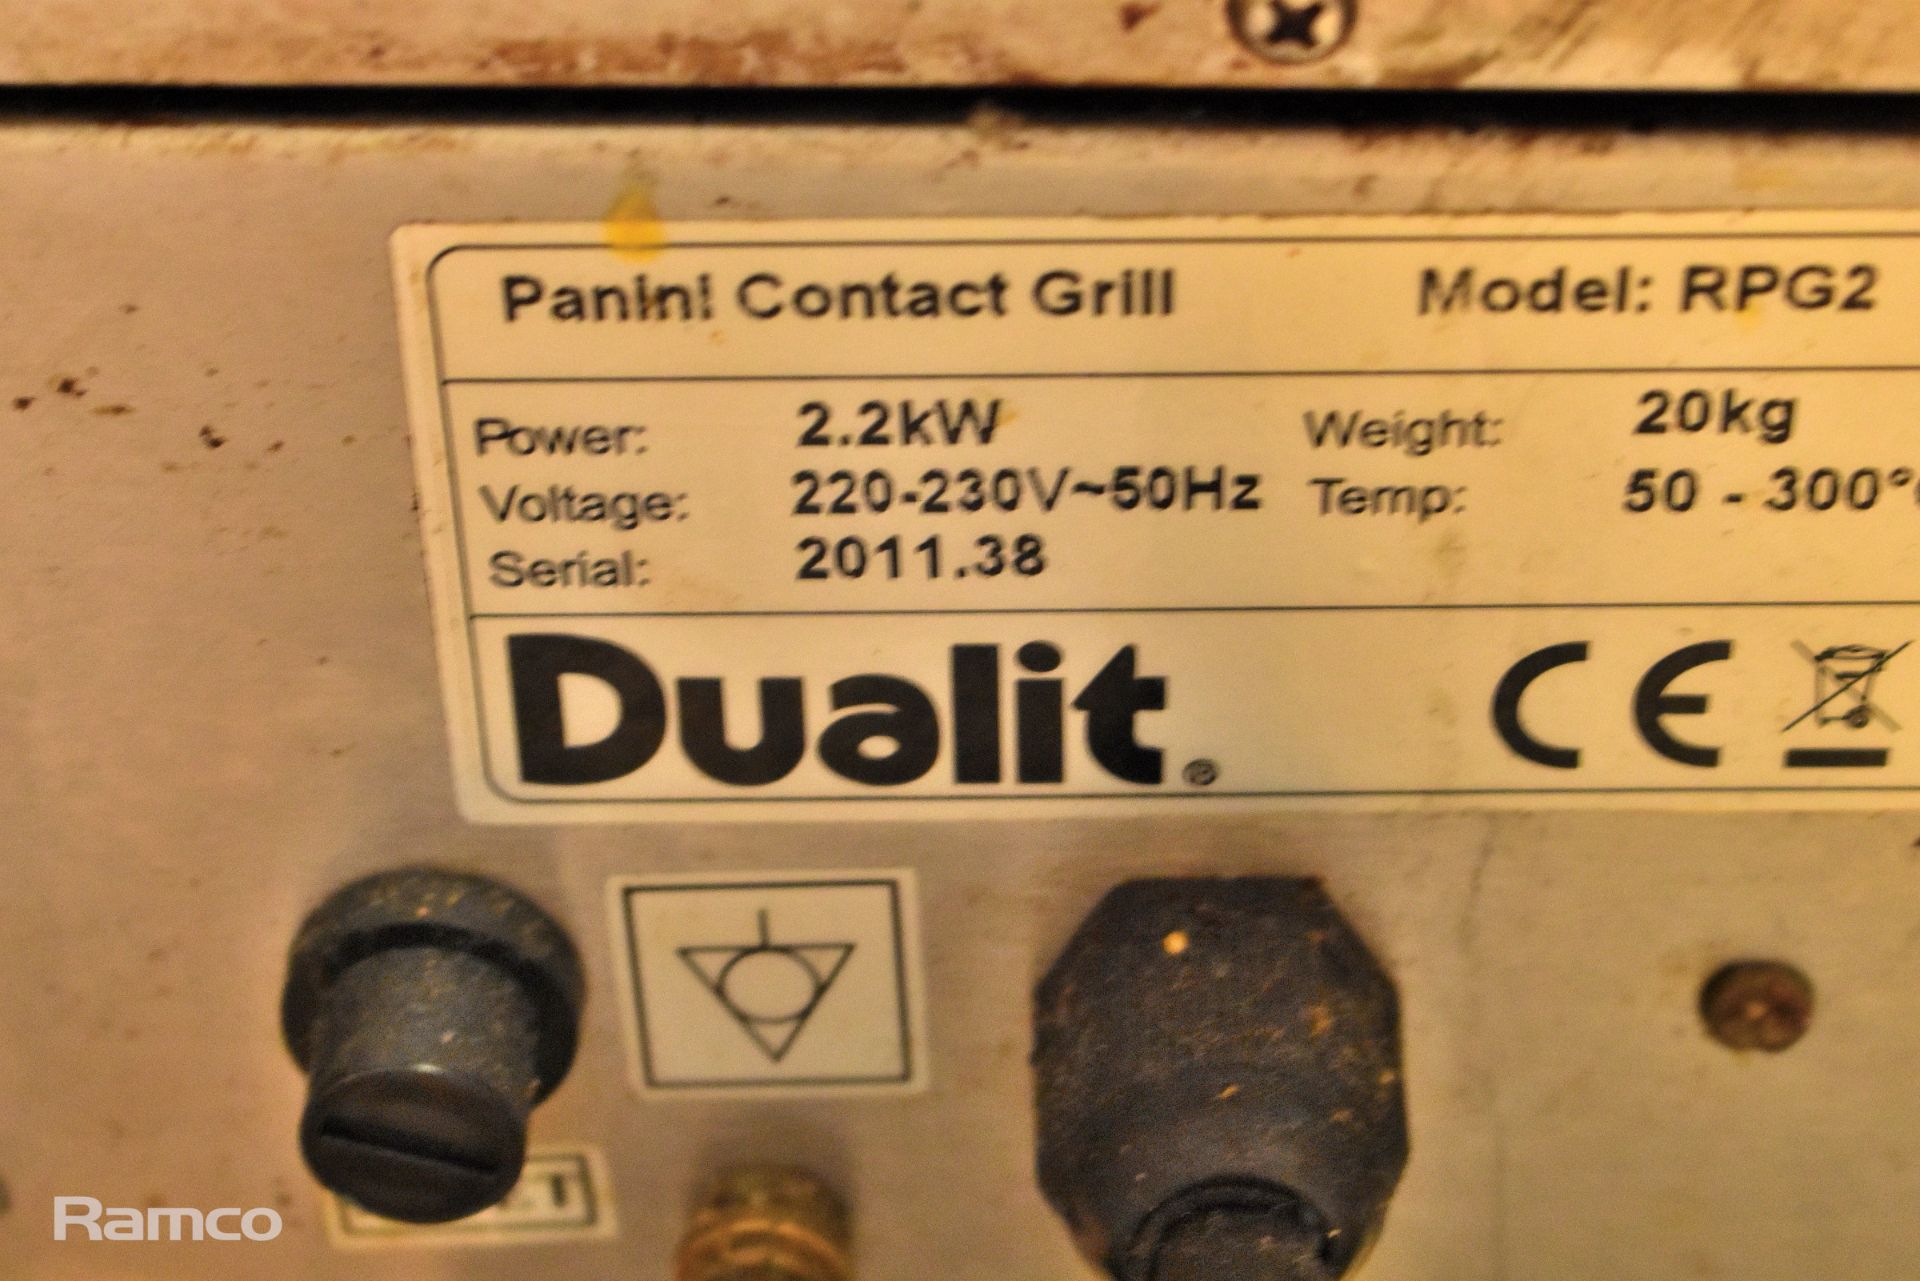 Dualit RPG2 panini contact grill - Image 4 of 5